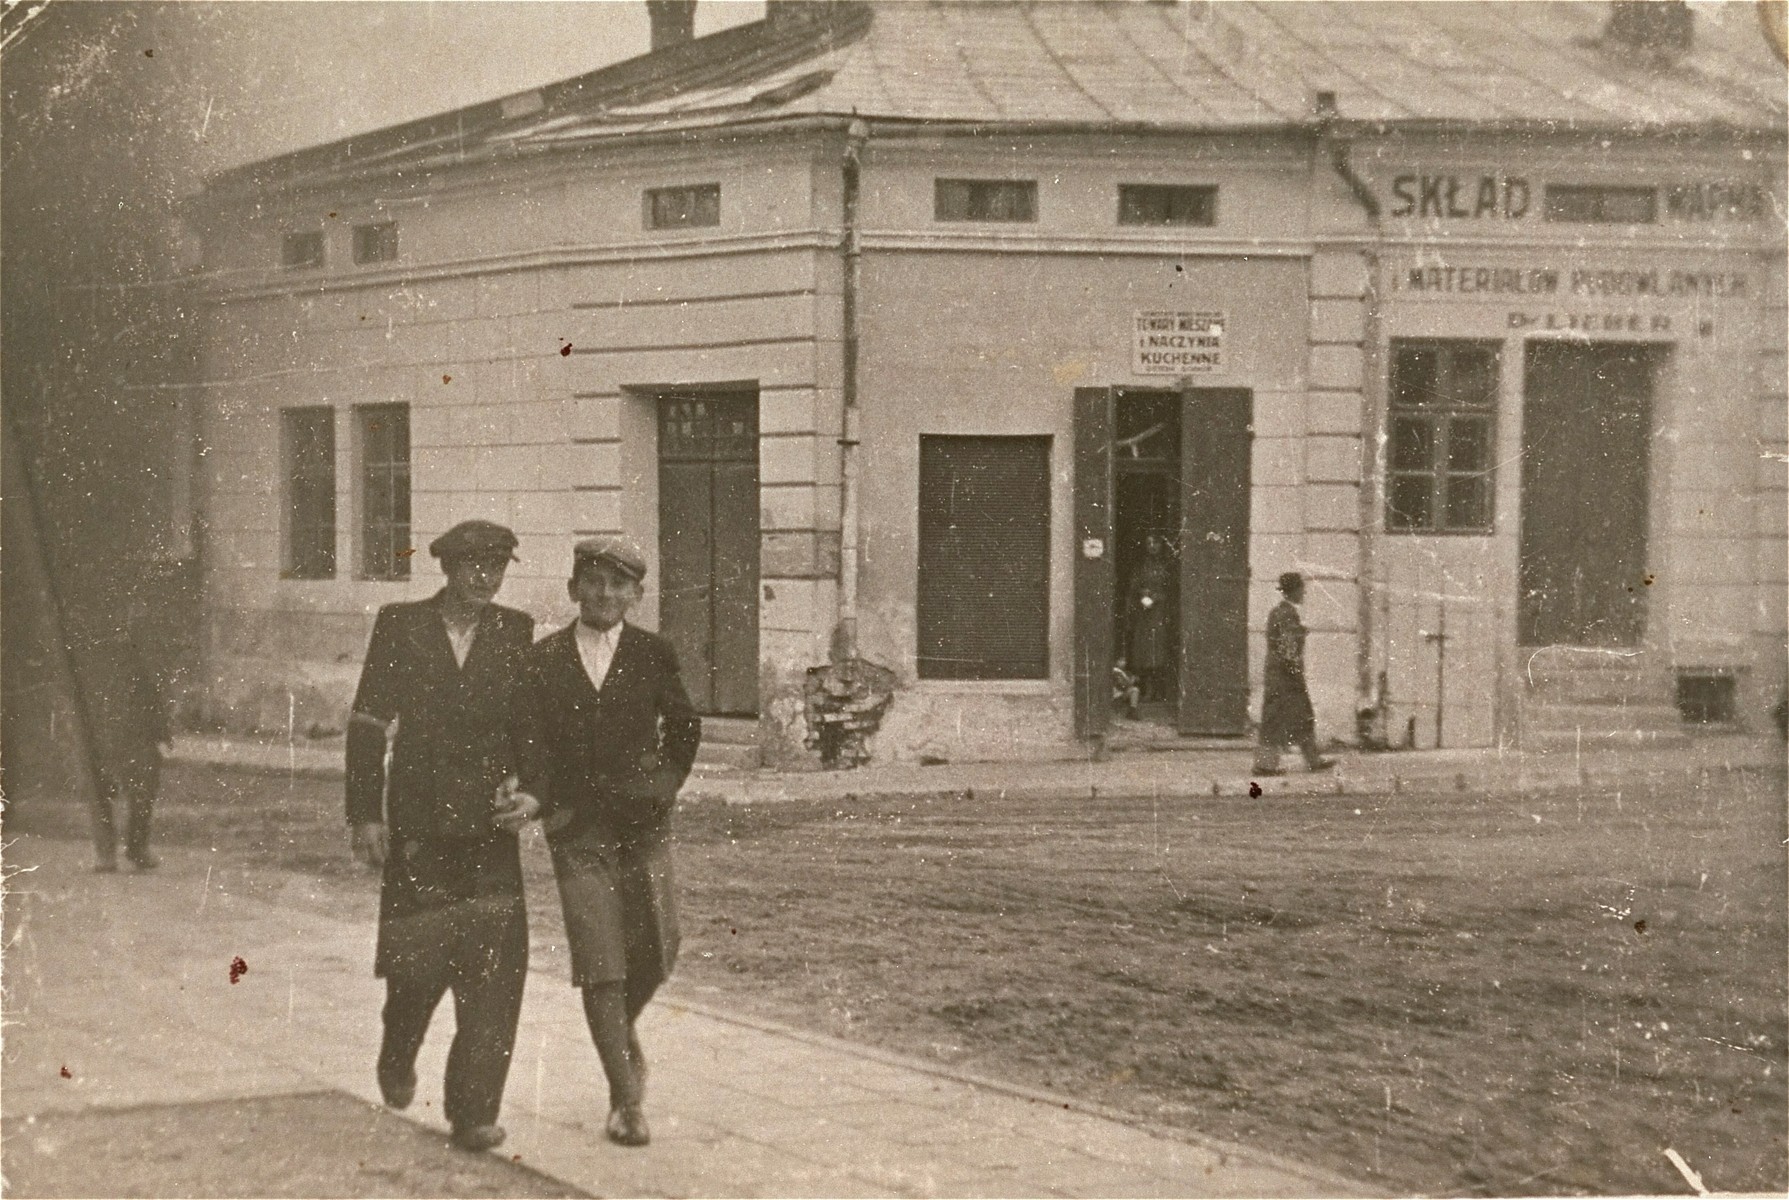 Two friends walk along a street in the Kolbuszowa ghetto.

Pictured is Manius Notowicz (right) with a friend named Grinstein in front of Lieber's building supply store.